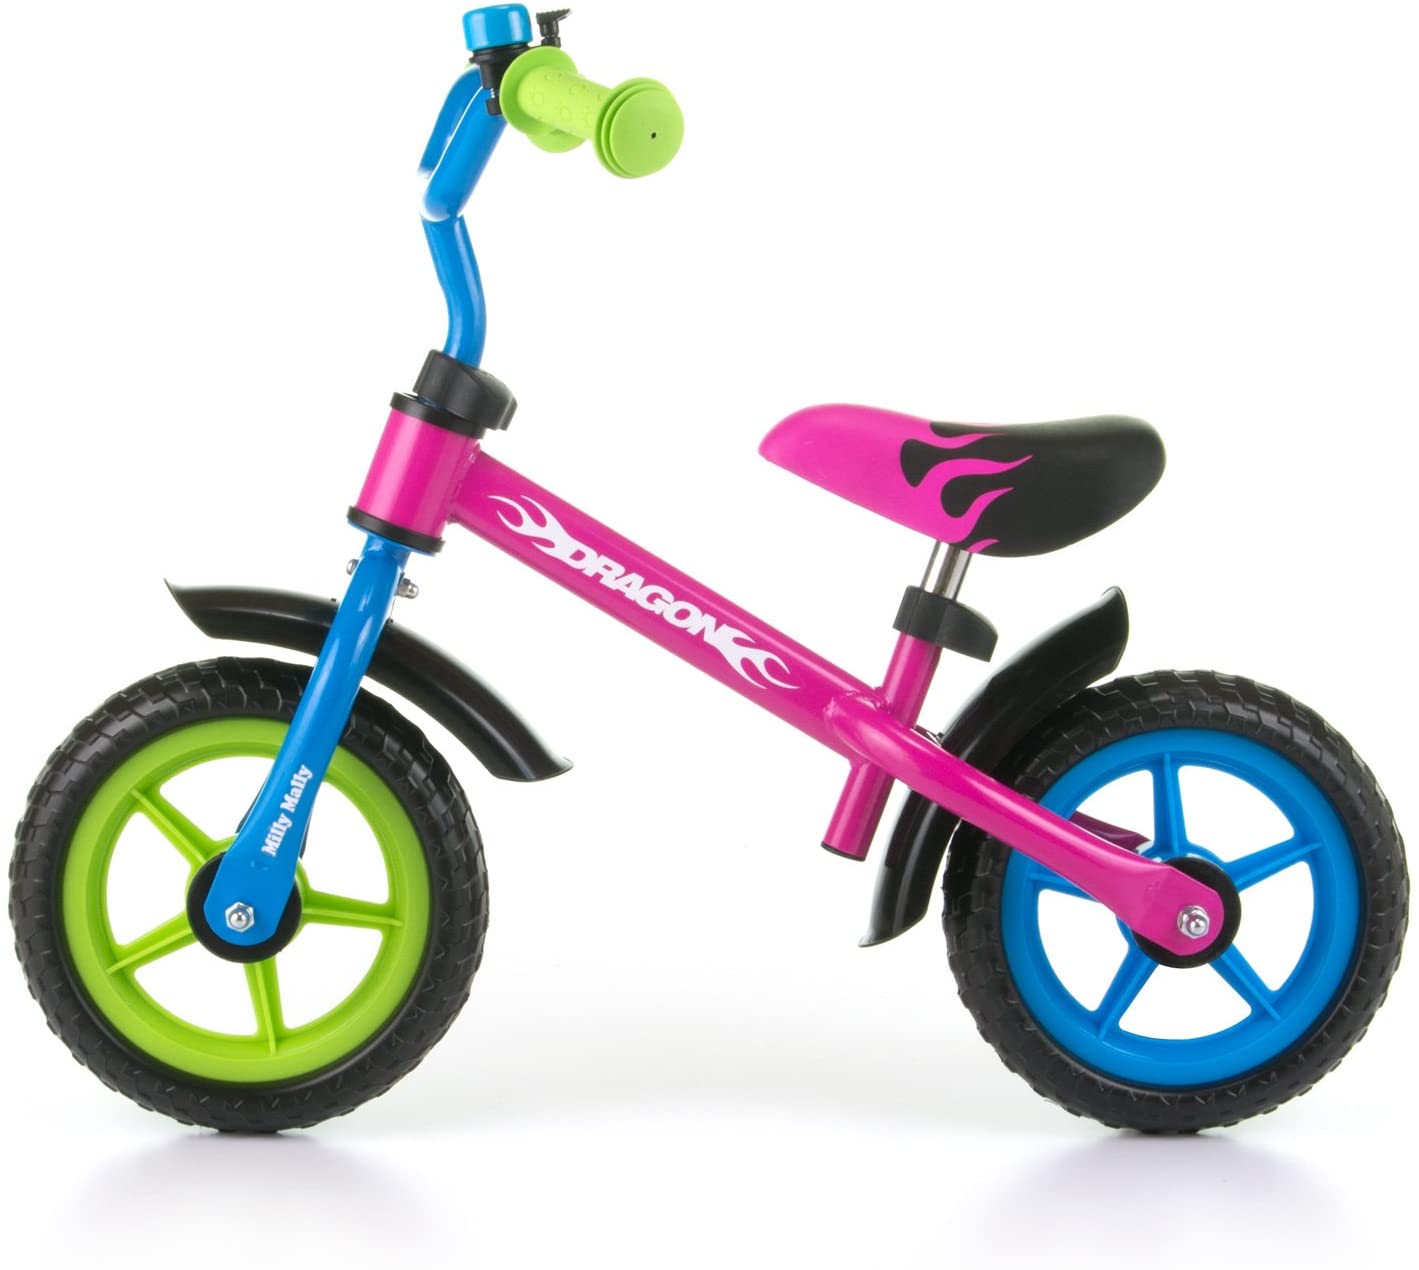 Milly Mally 4805 Children's Balance Bike 10 Inch Wheels with Bell, multicol